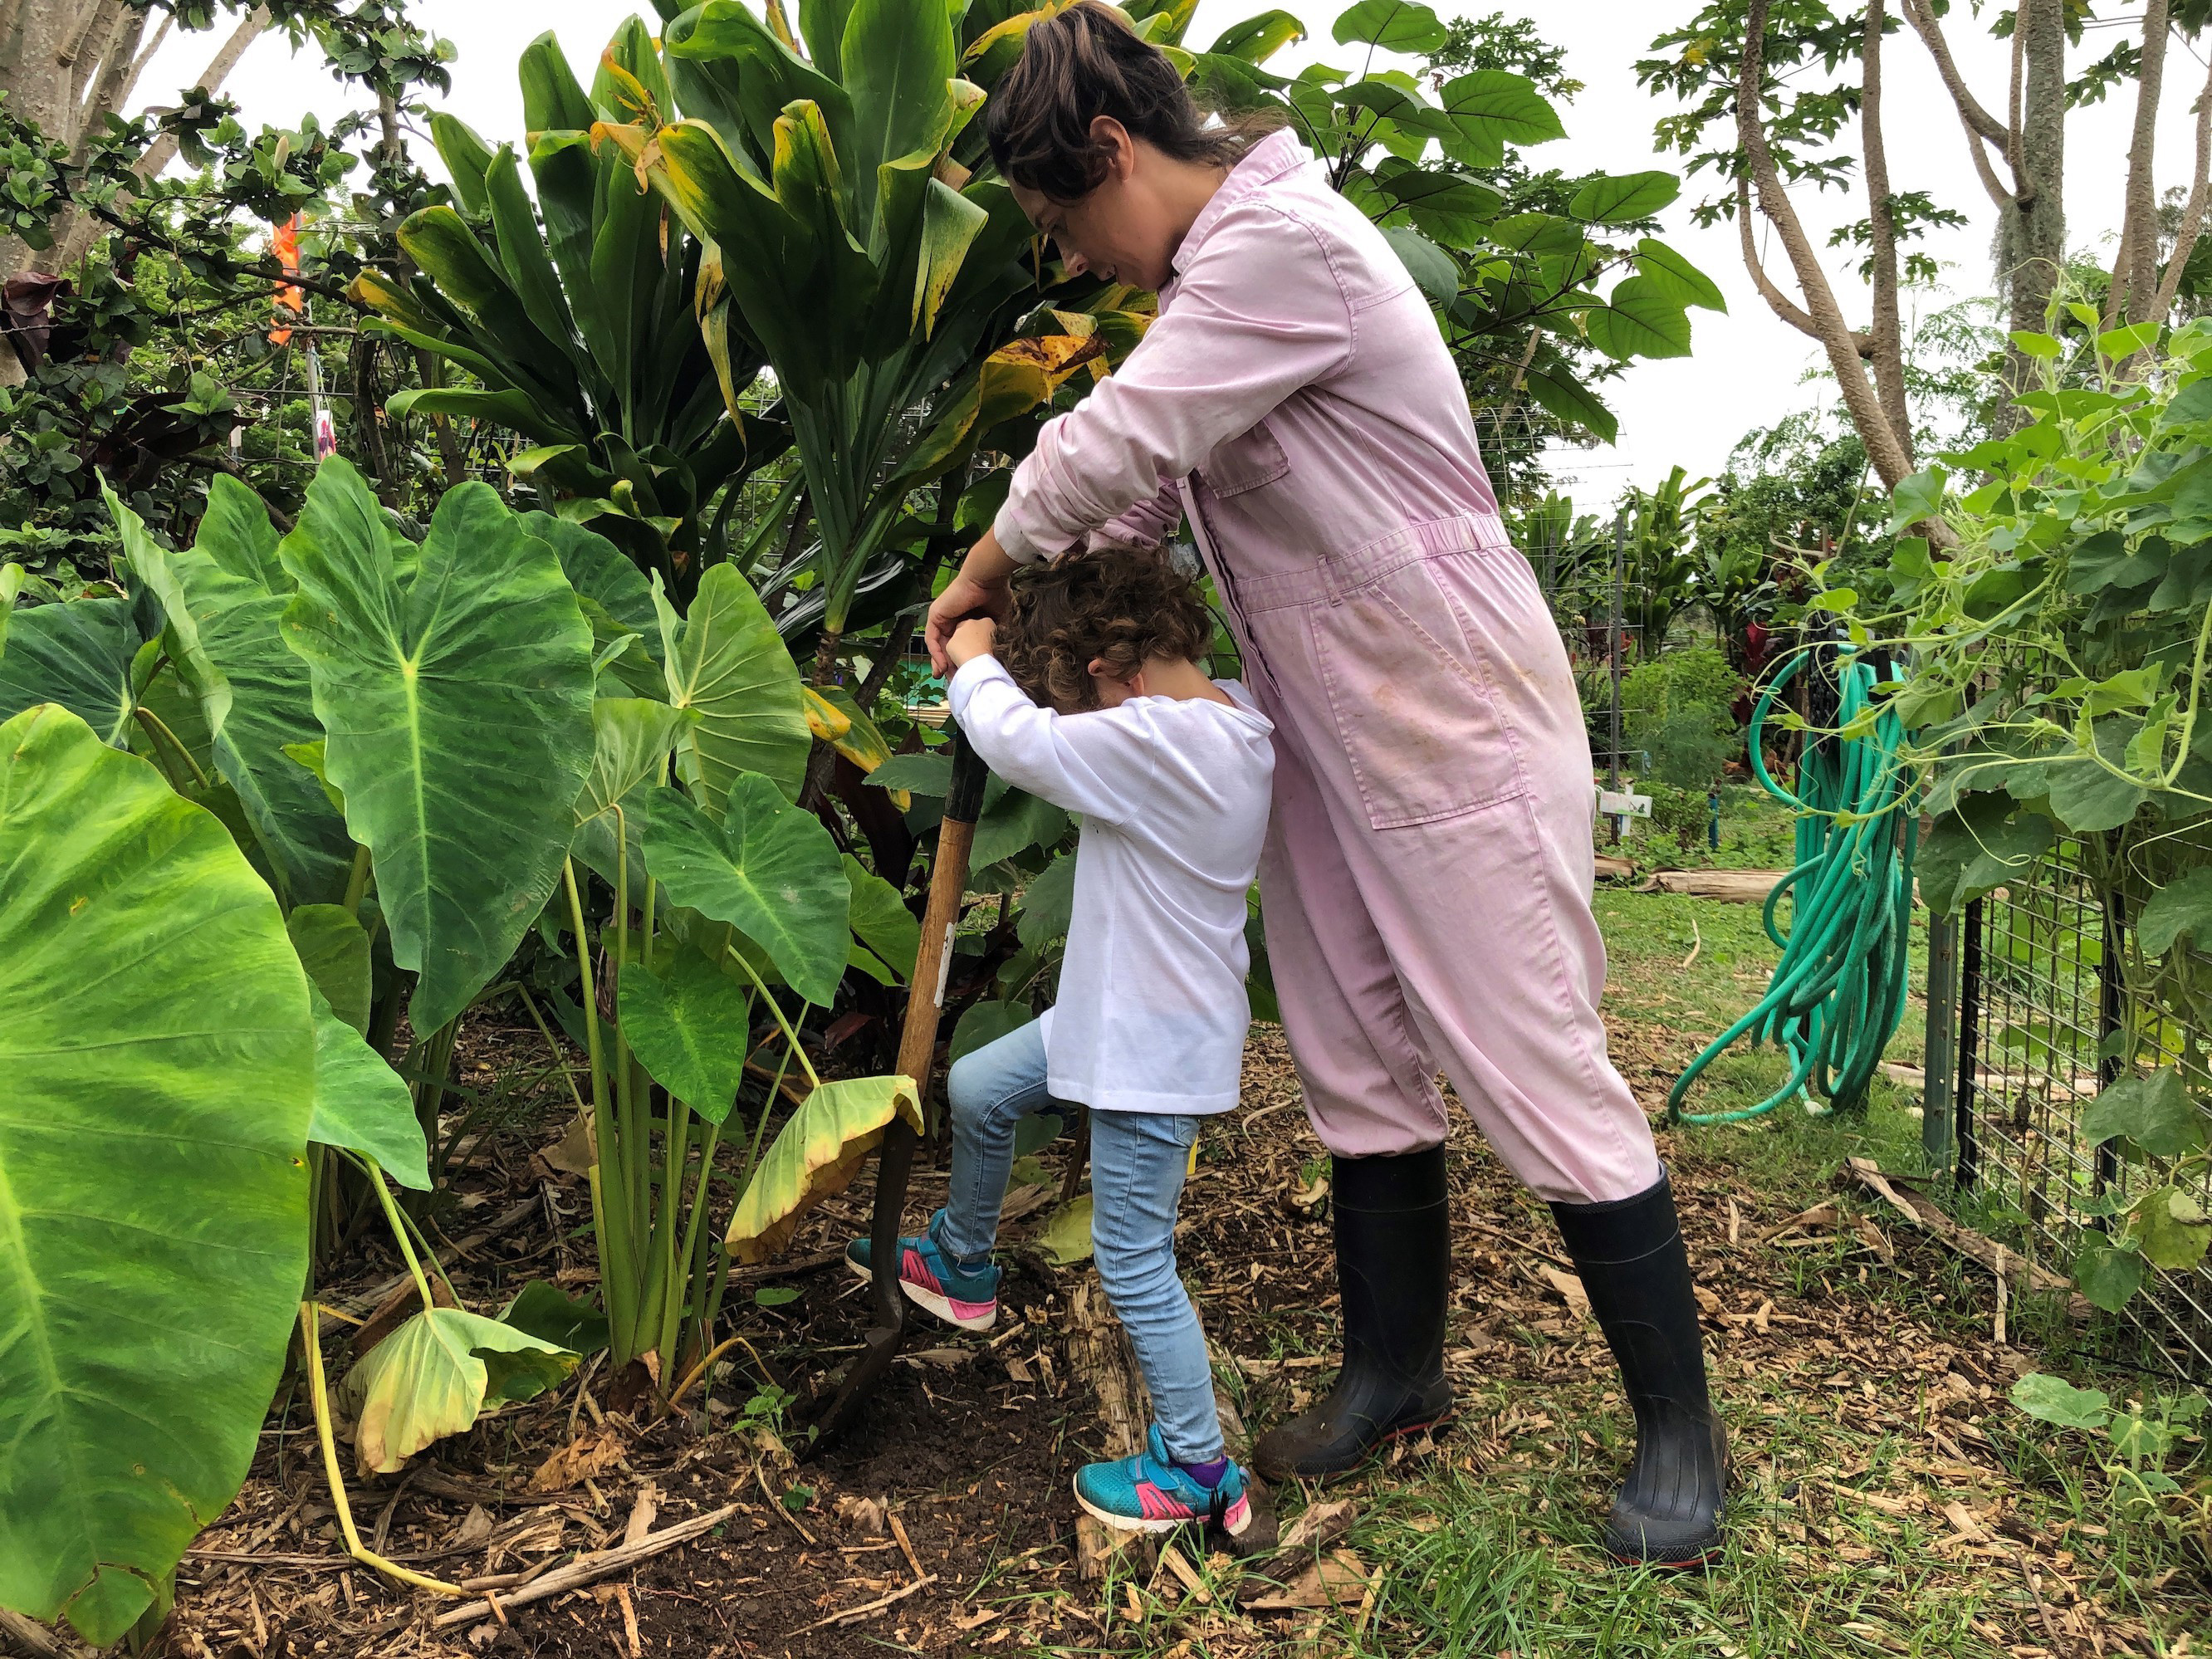 Chick-fil-A awards $300,000 to The Maui Farm for making an impact in its community by providing farm-based, family-centered programs that teach essential life skills for self-sufficient living.